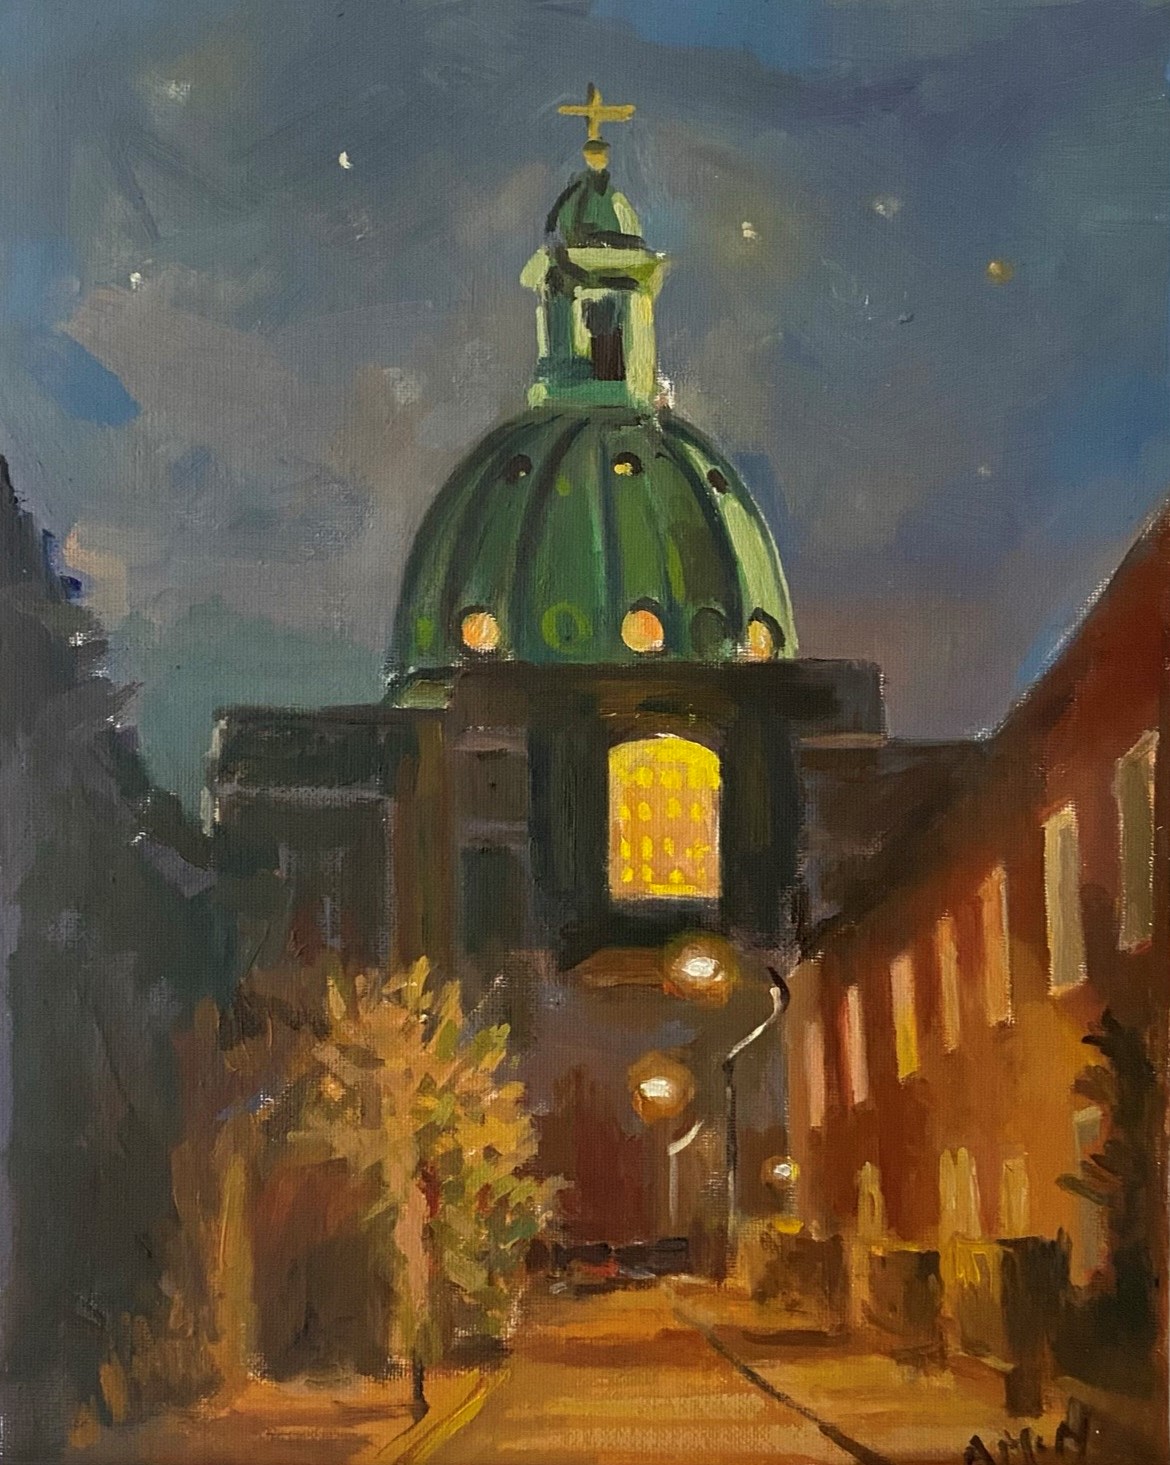 Evening in Rathmines by Anne Mc Nulty